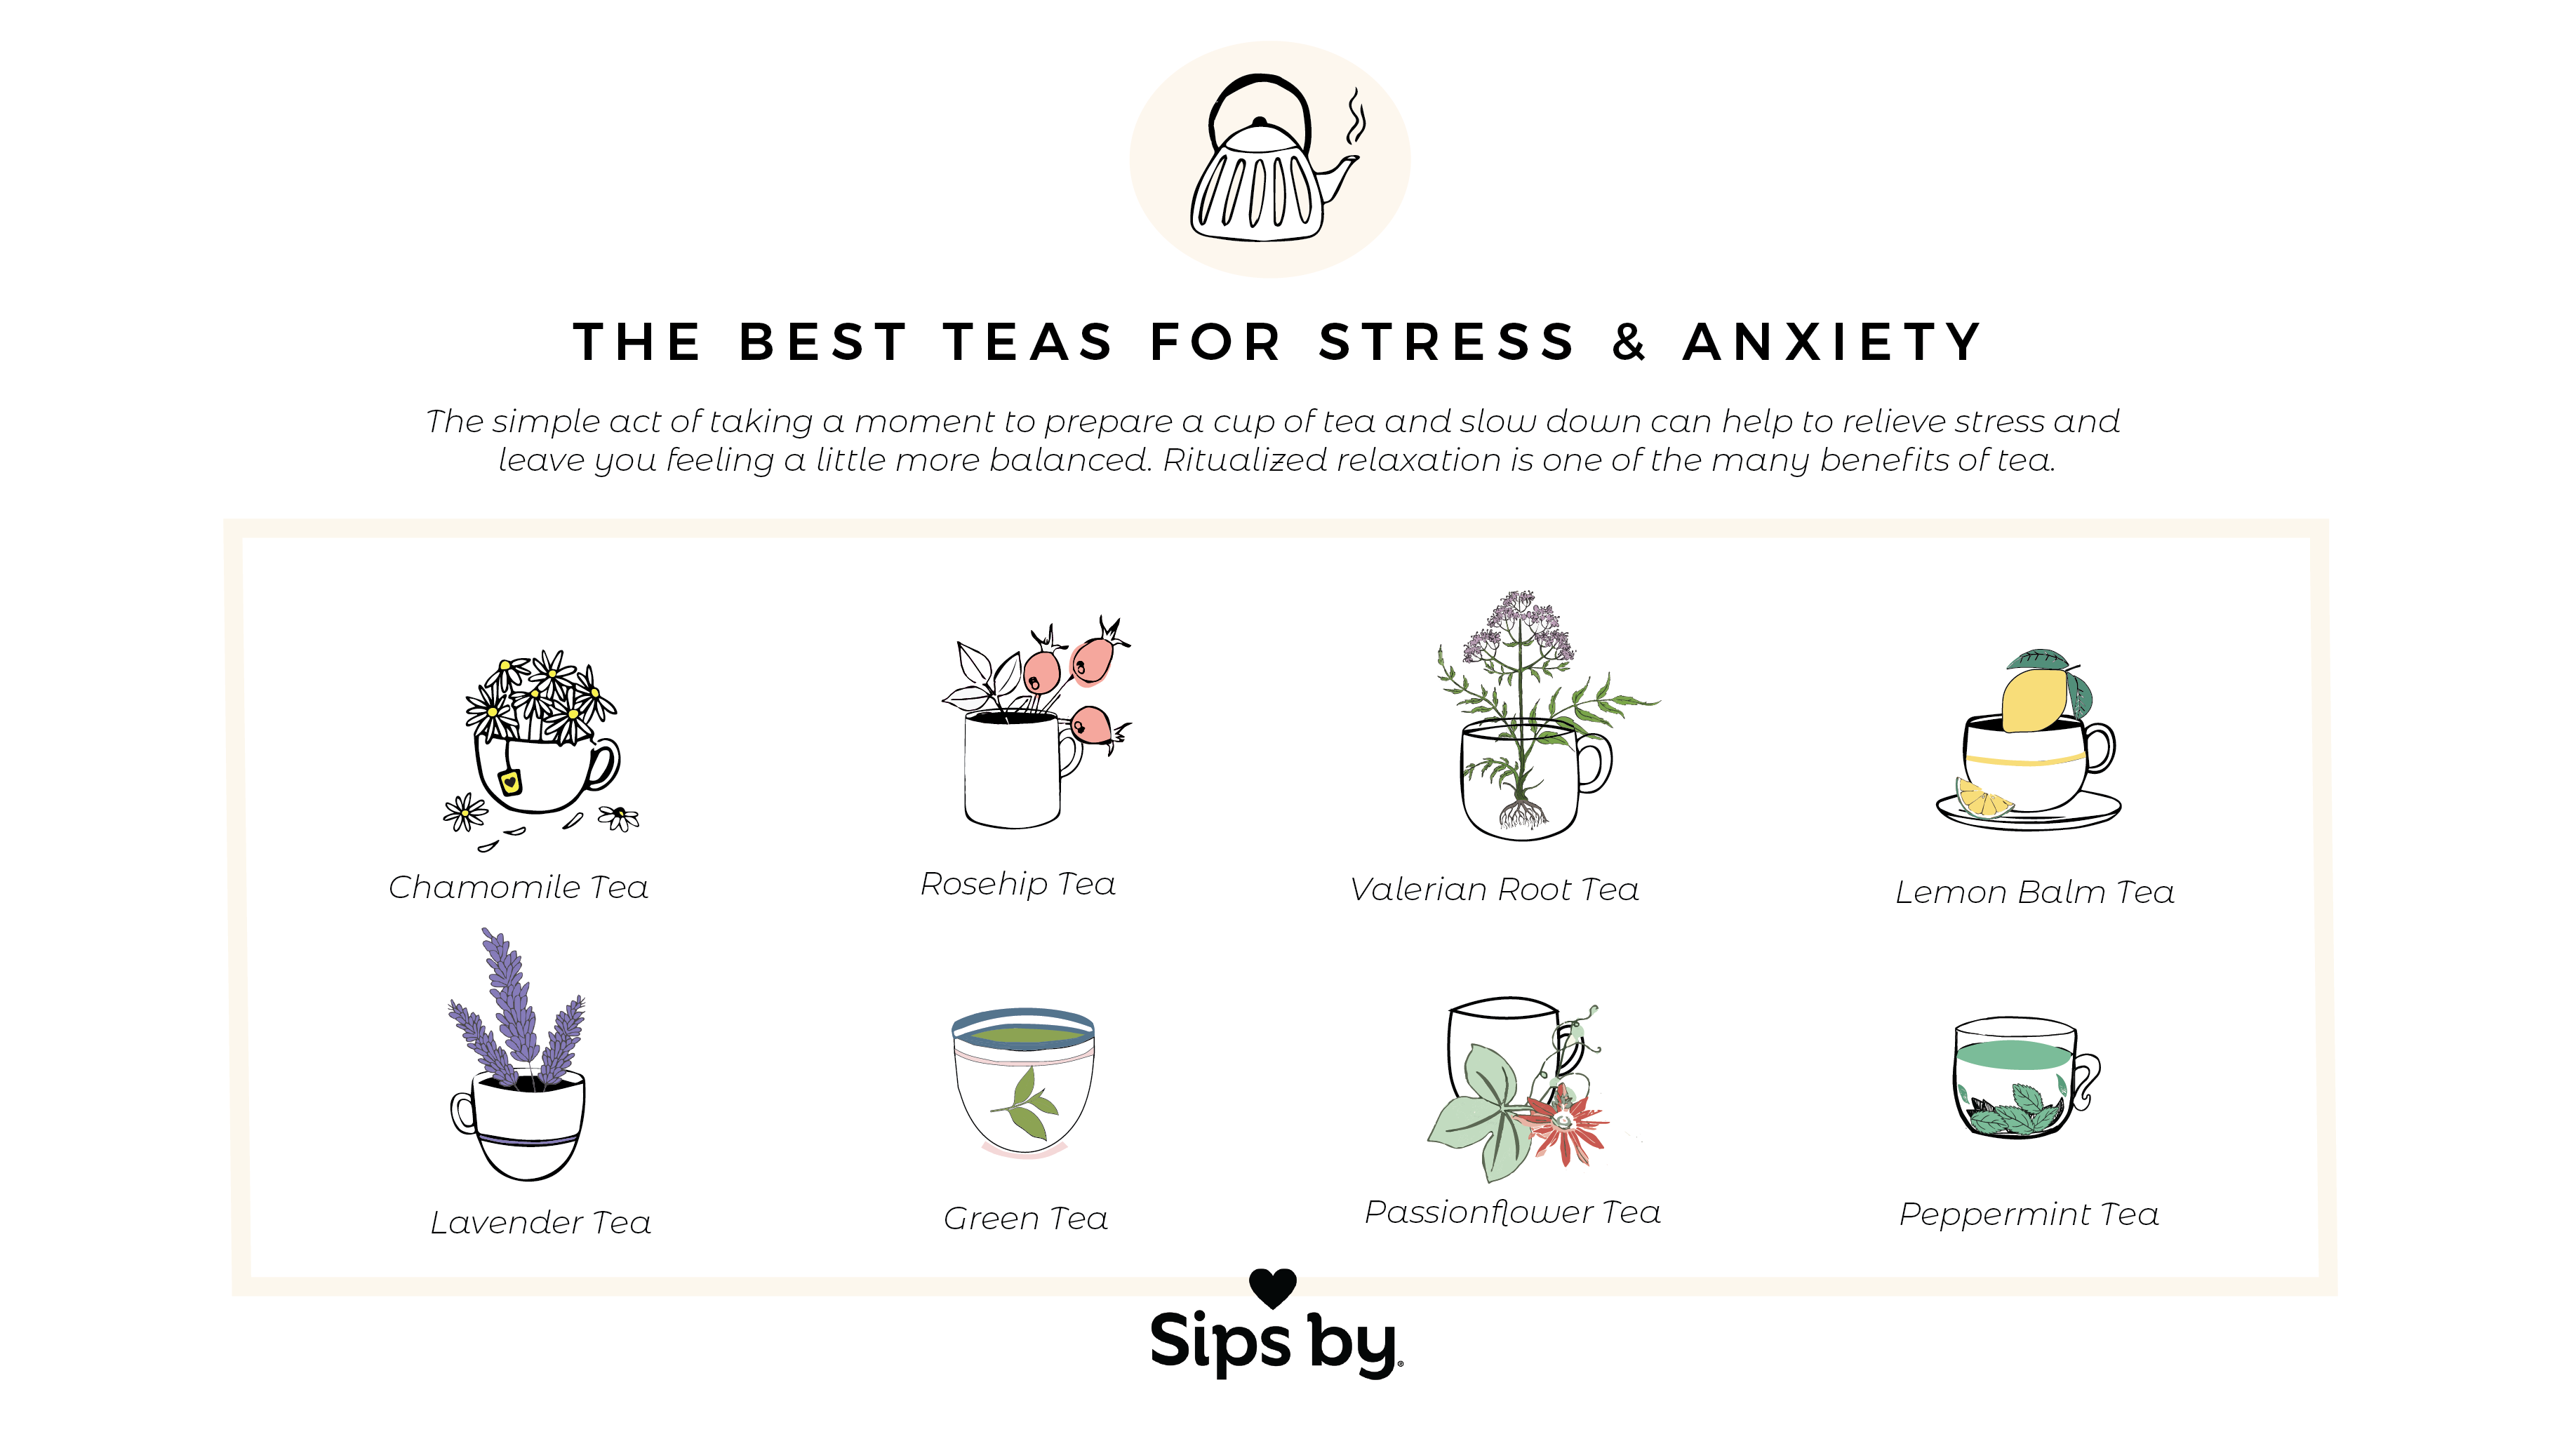 The Best Teas for Stress & Anxiety from Sips by